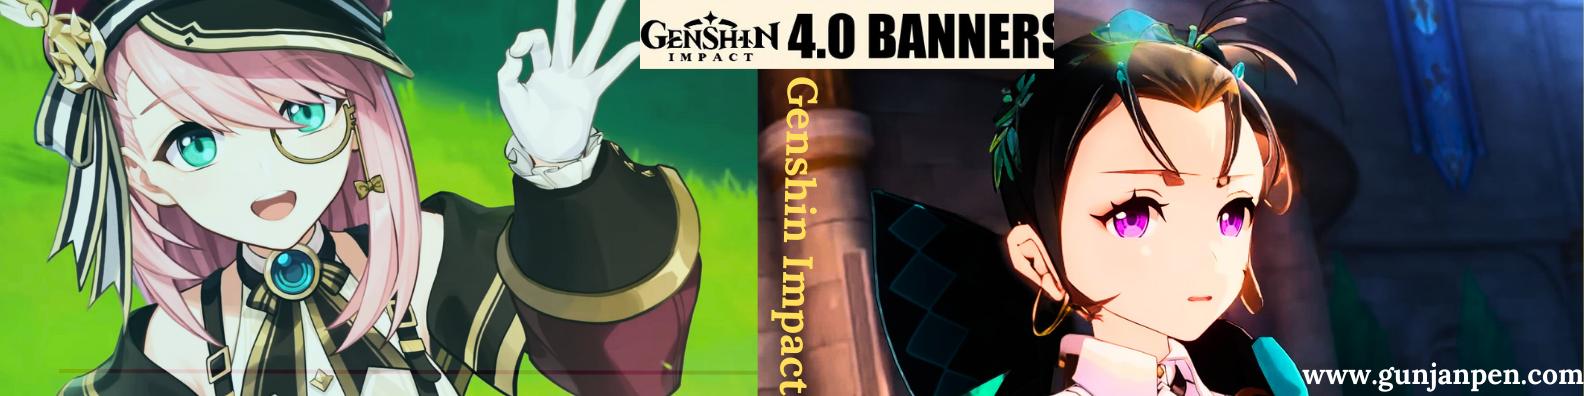 Genshin Impact 4.2 Leak: Exclusive Details on Spiral Abyss Enemies Revealed!